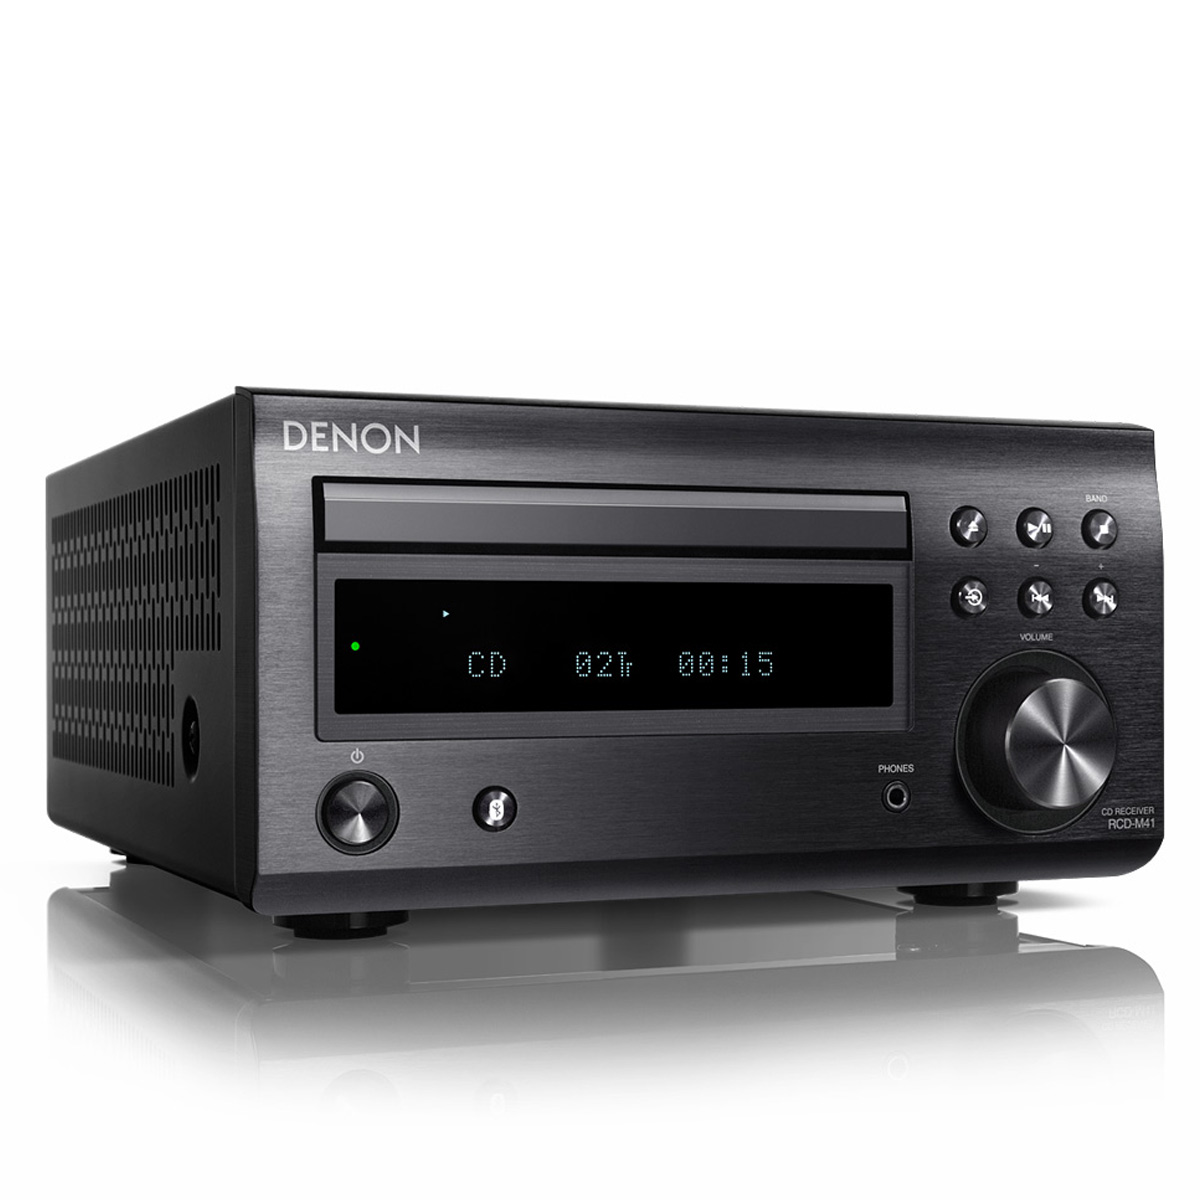 Denon D-M41 Hi-Fi System with CD, Bluetooth, and AM/FM Tuner - image 3 of 3